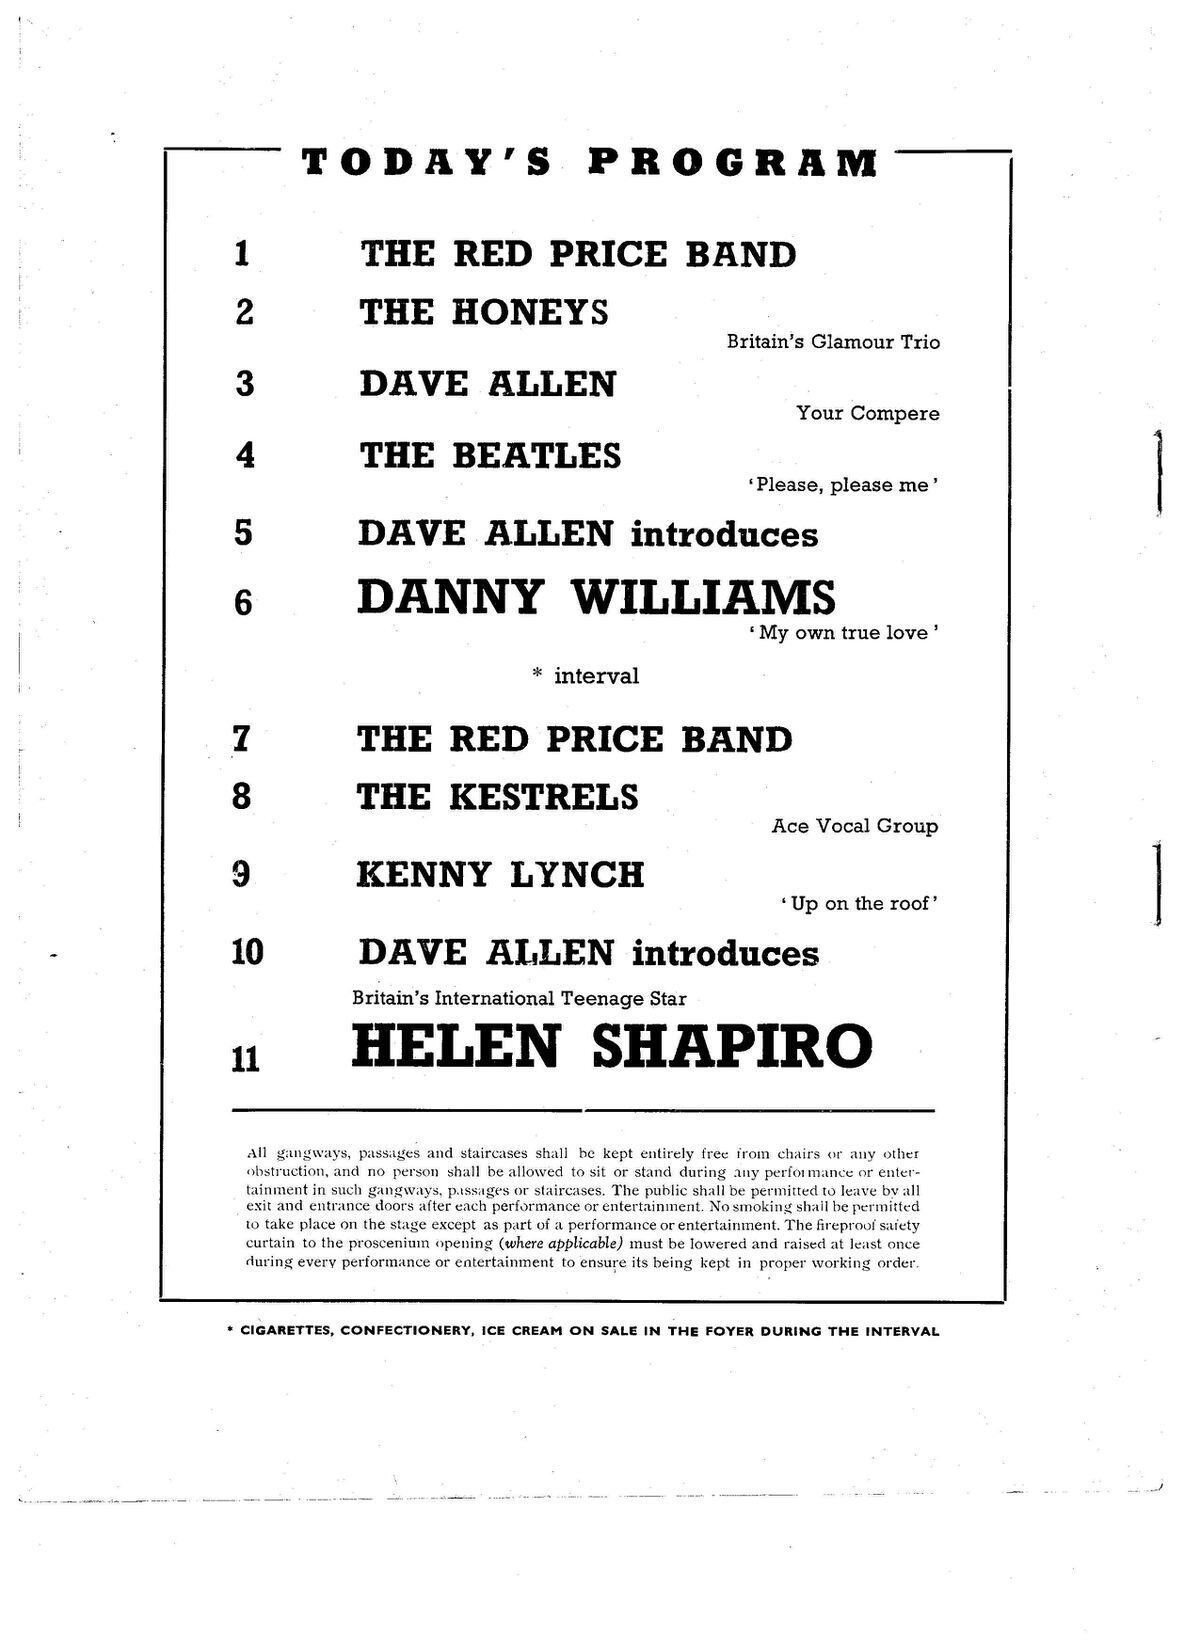 The Beatles were still well down the bill when they played the Granada in February 1963 when Helen Shapiro was the headline act.